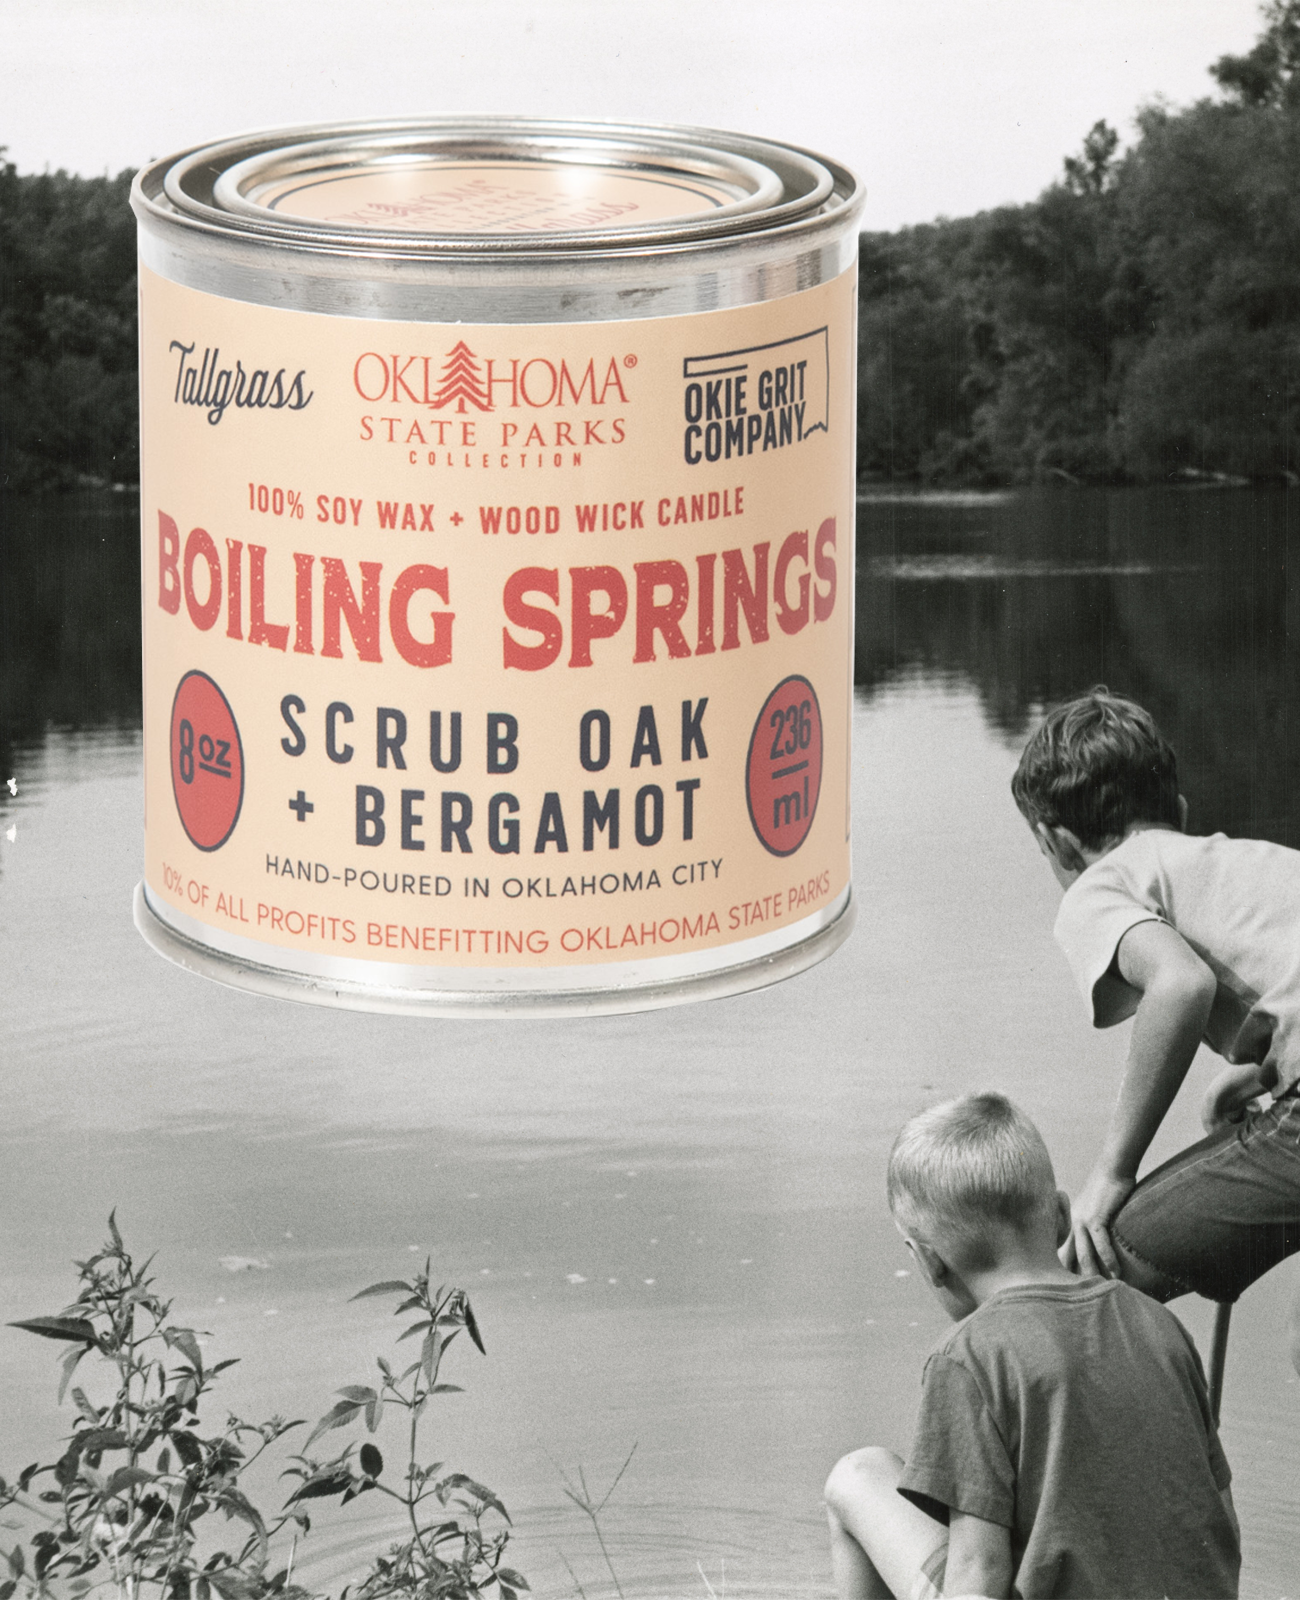 Boiling Springs: Oklahoma State Parks Collection